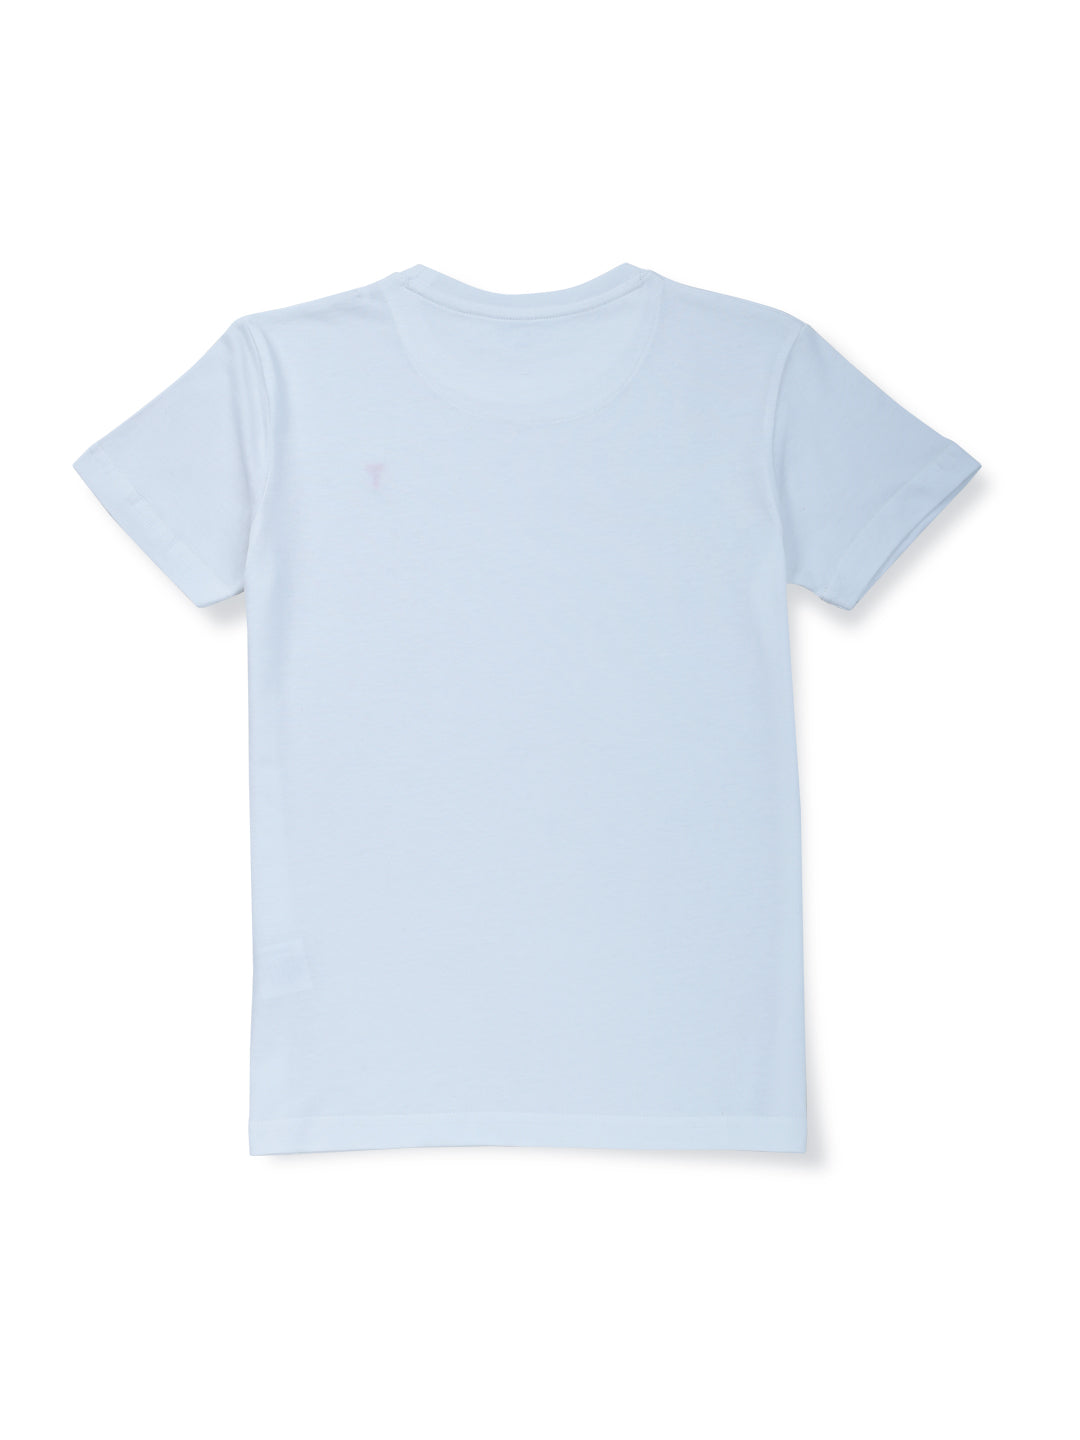 Boys White Solid Cotton T-Shirt